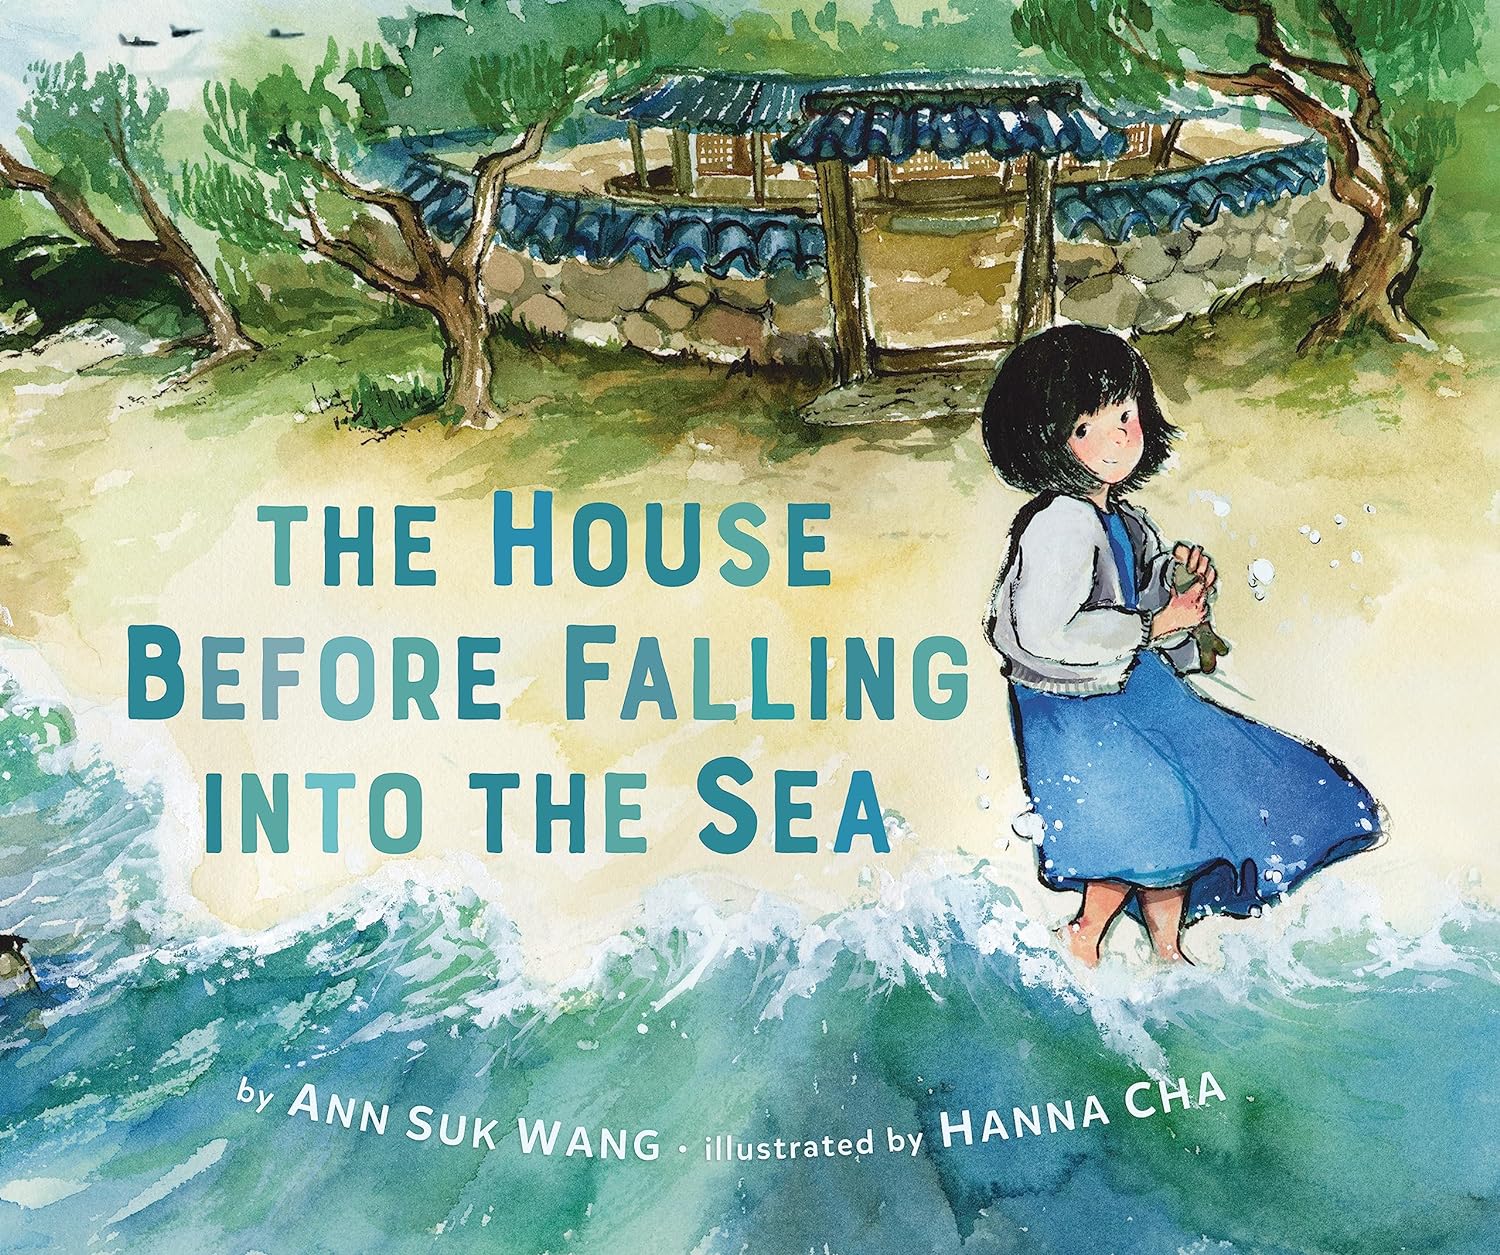 Review of The House Before Falling into the Sea